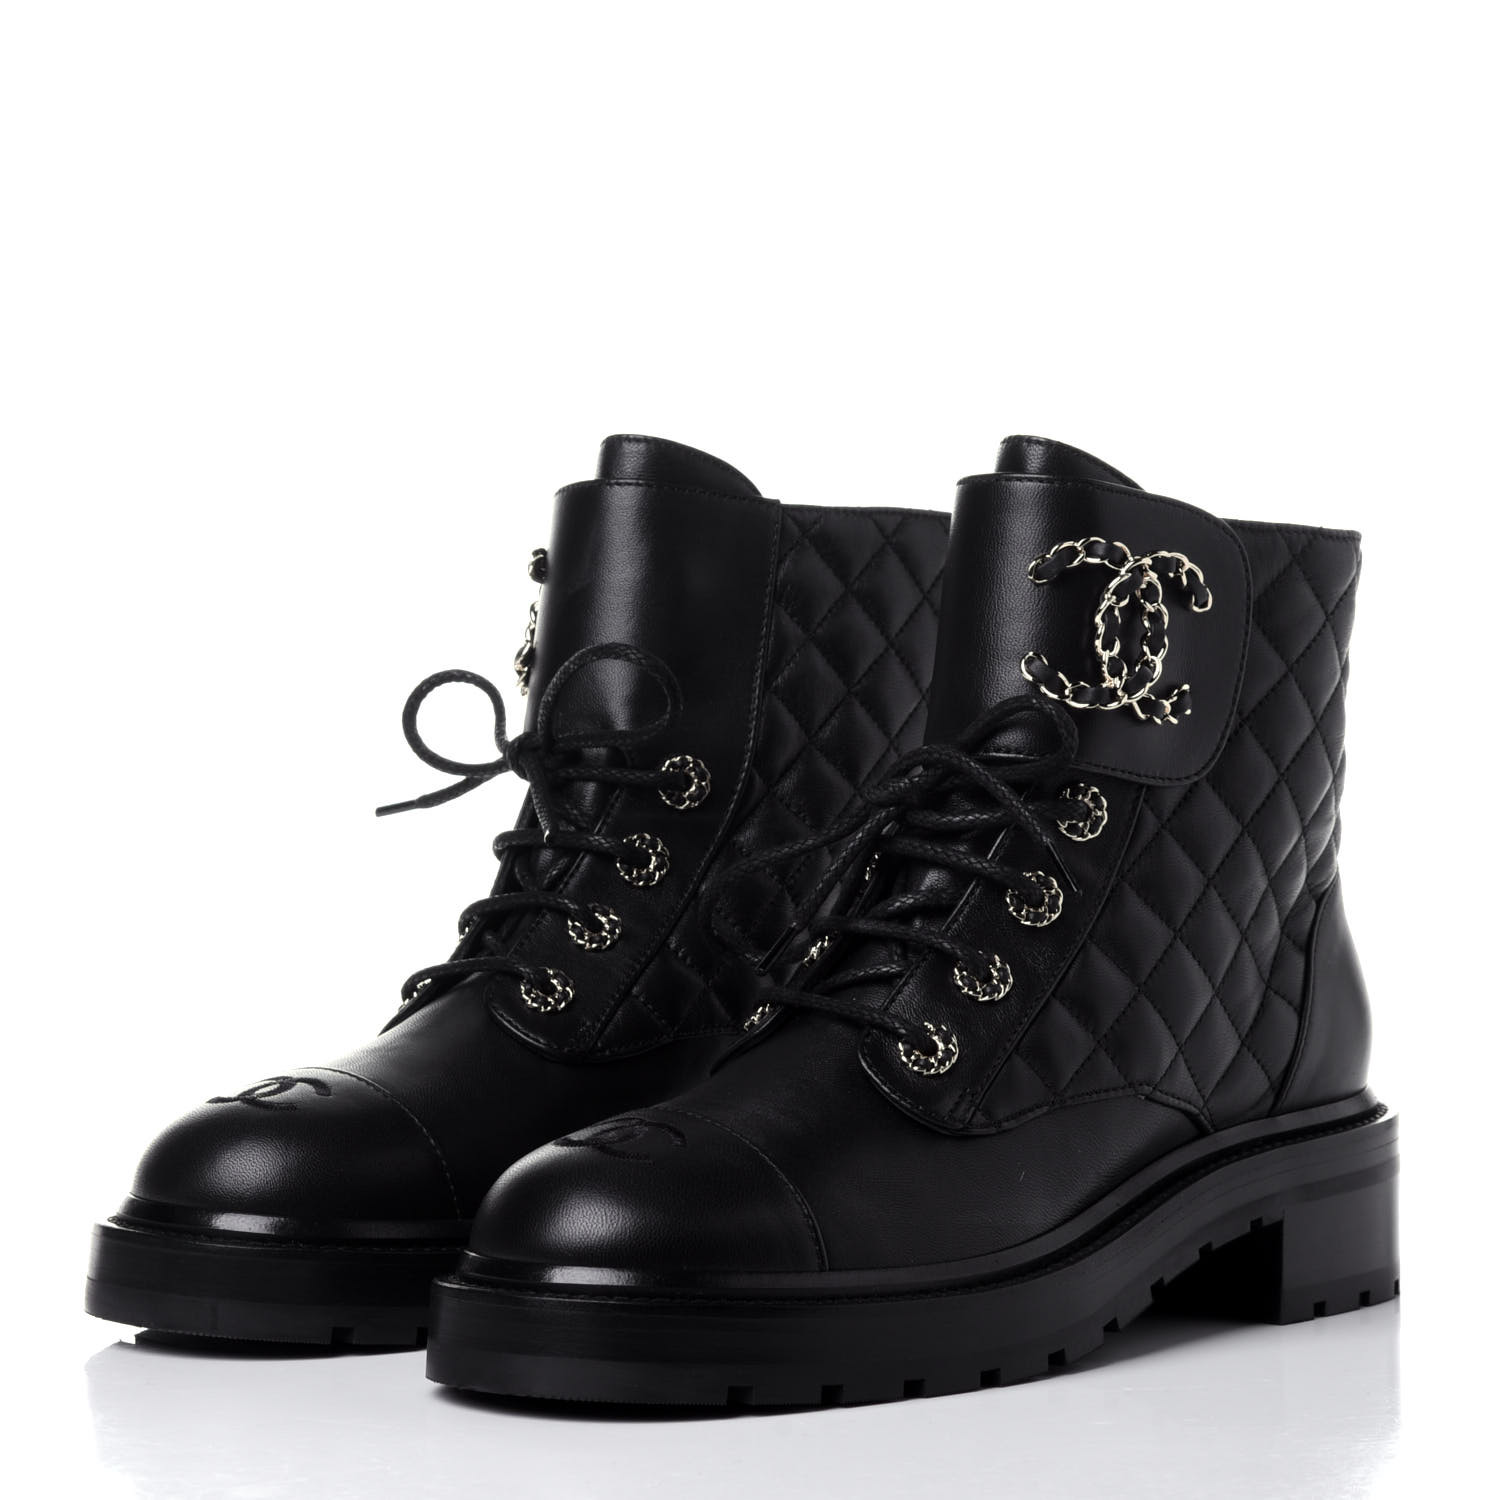 CHANEL Shiny Lambskin Quilted Lace Up Combat Boots 39.5 Black 792456 ...